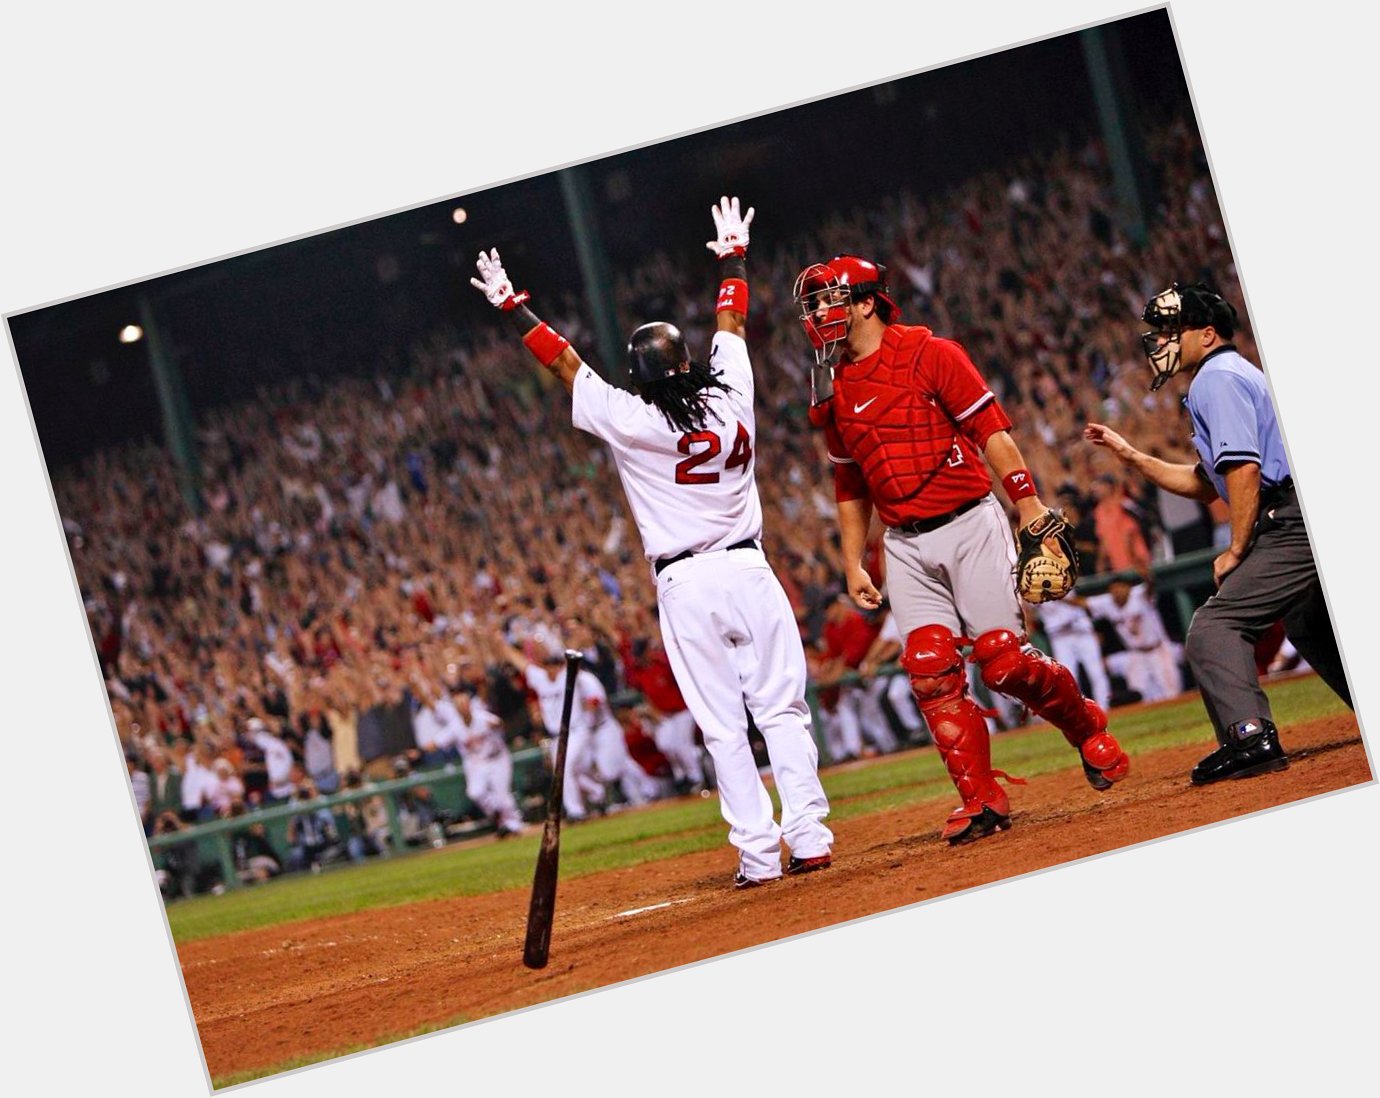 48 years young today, Happy Birthday to the one and only Manny Ramirez. 